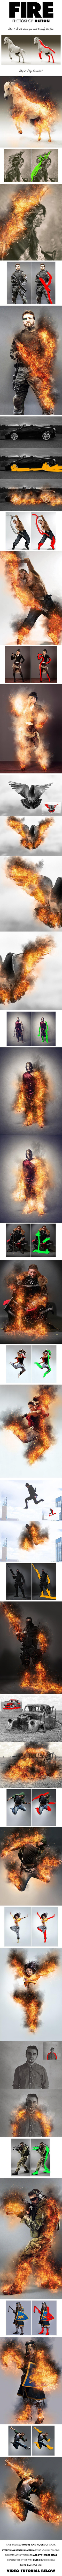 Sevenstyles Best Burning Fire Photoshop Action